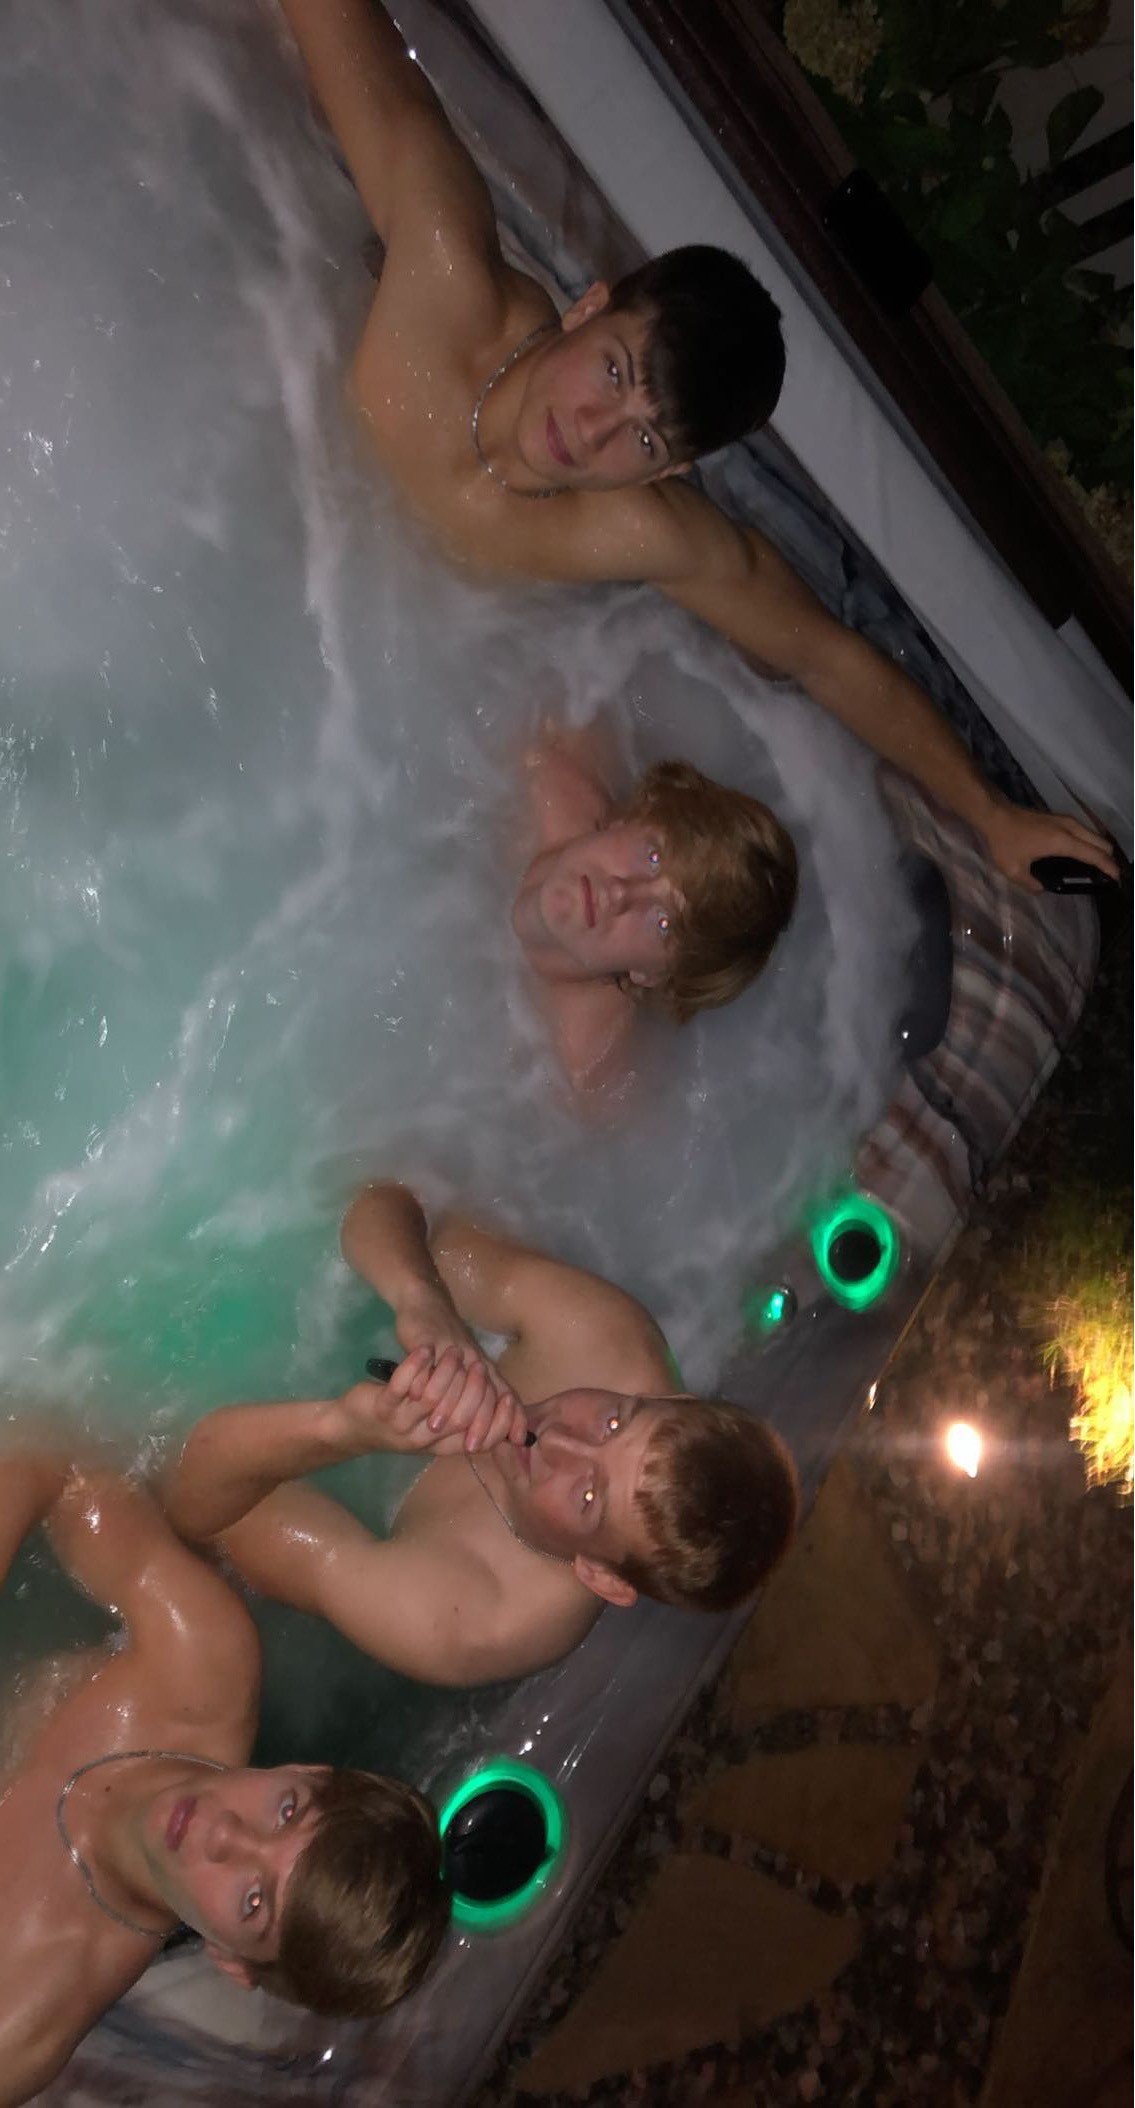 this is a photo of my friends and I hottubing